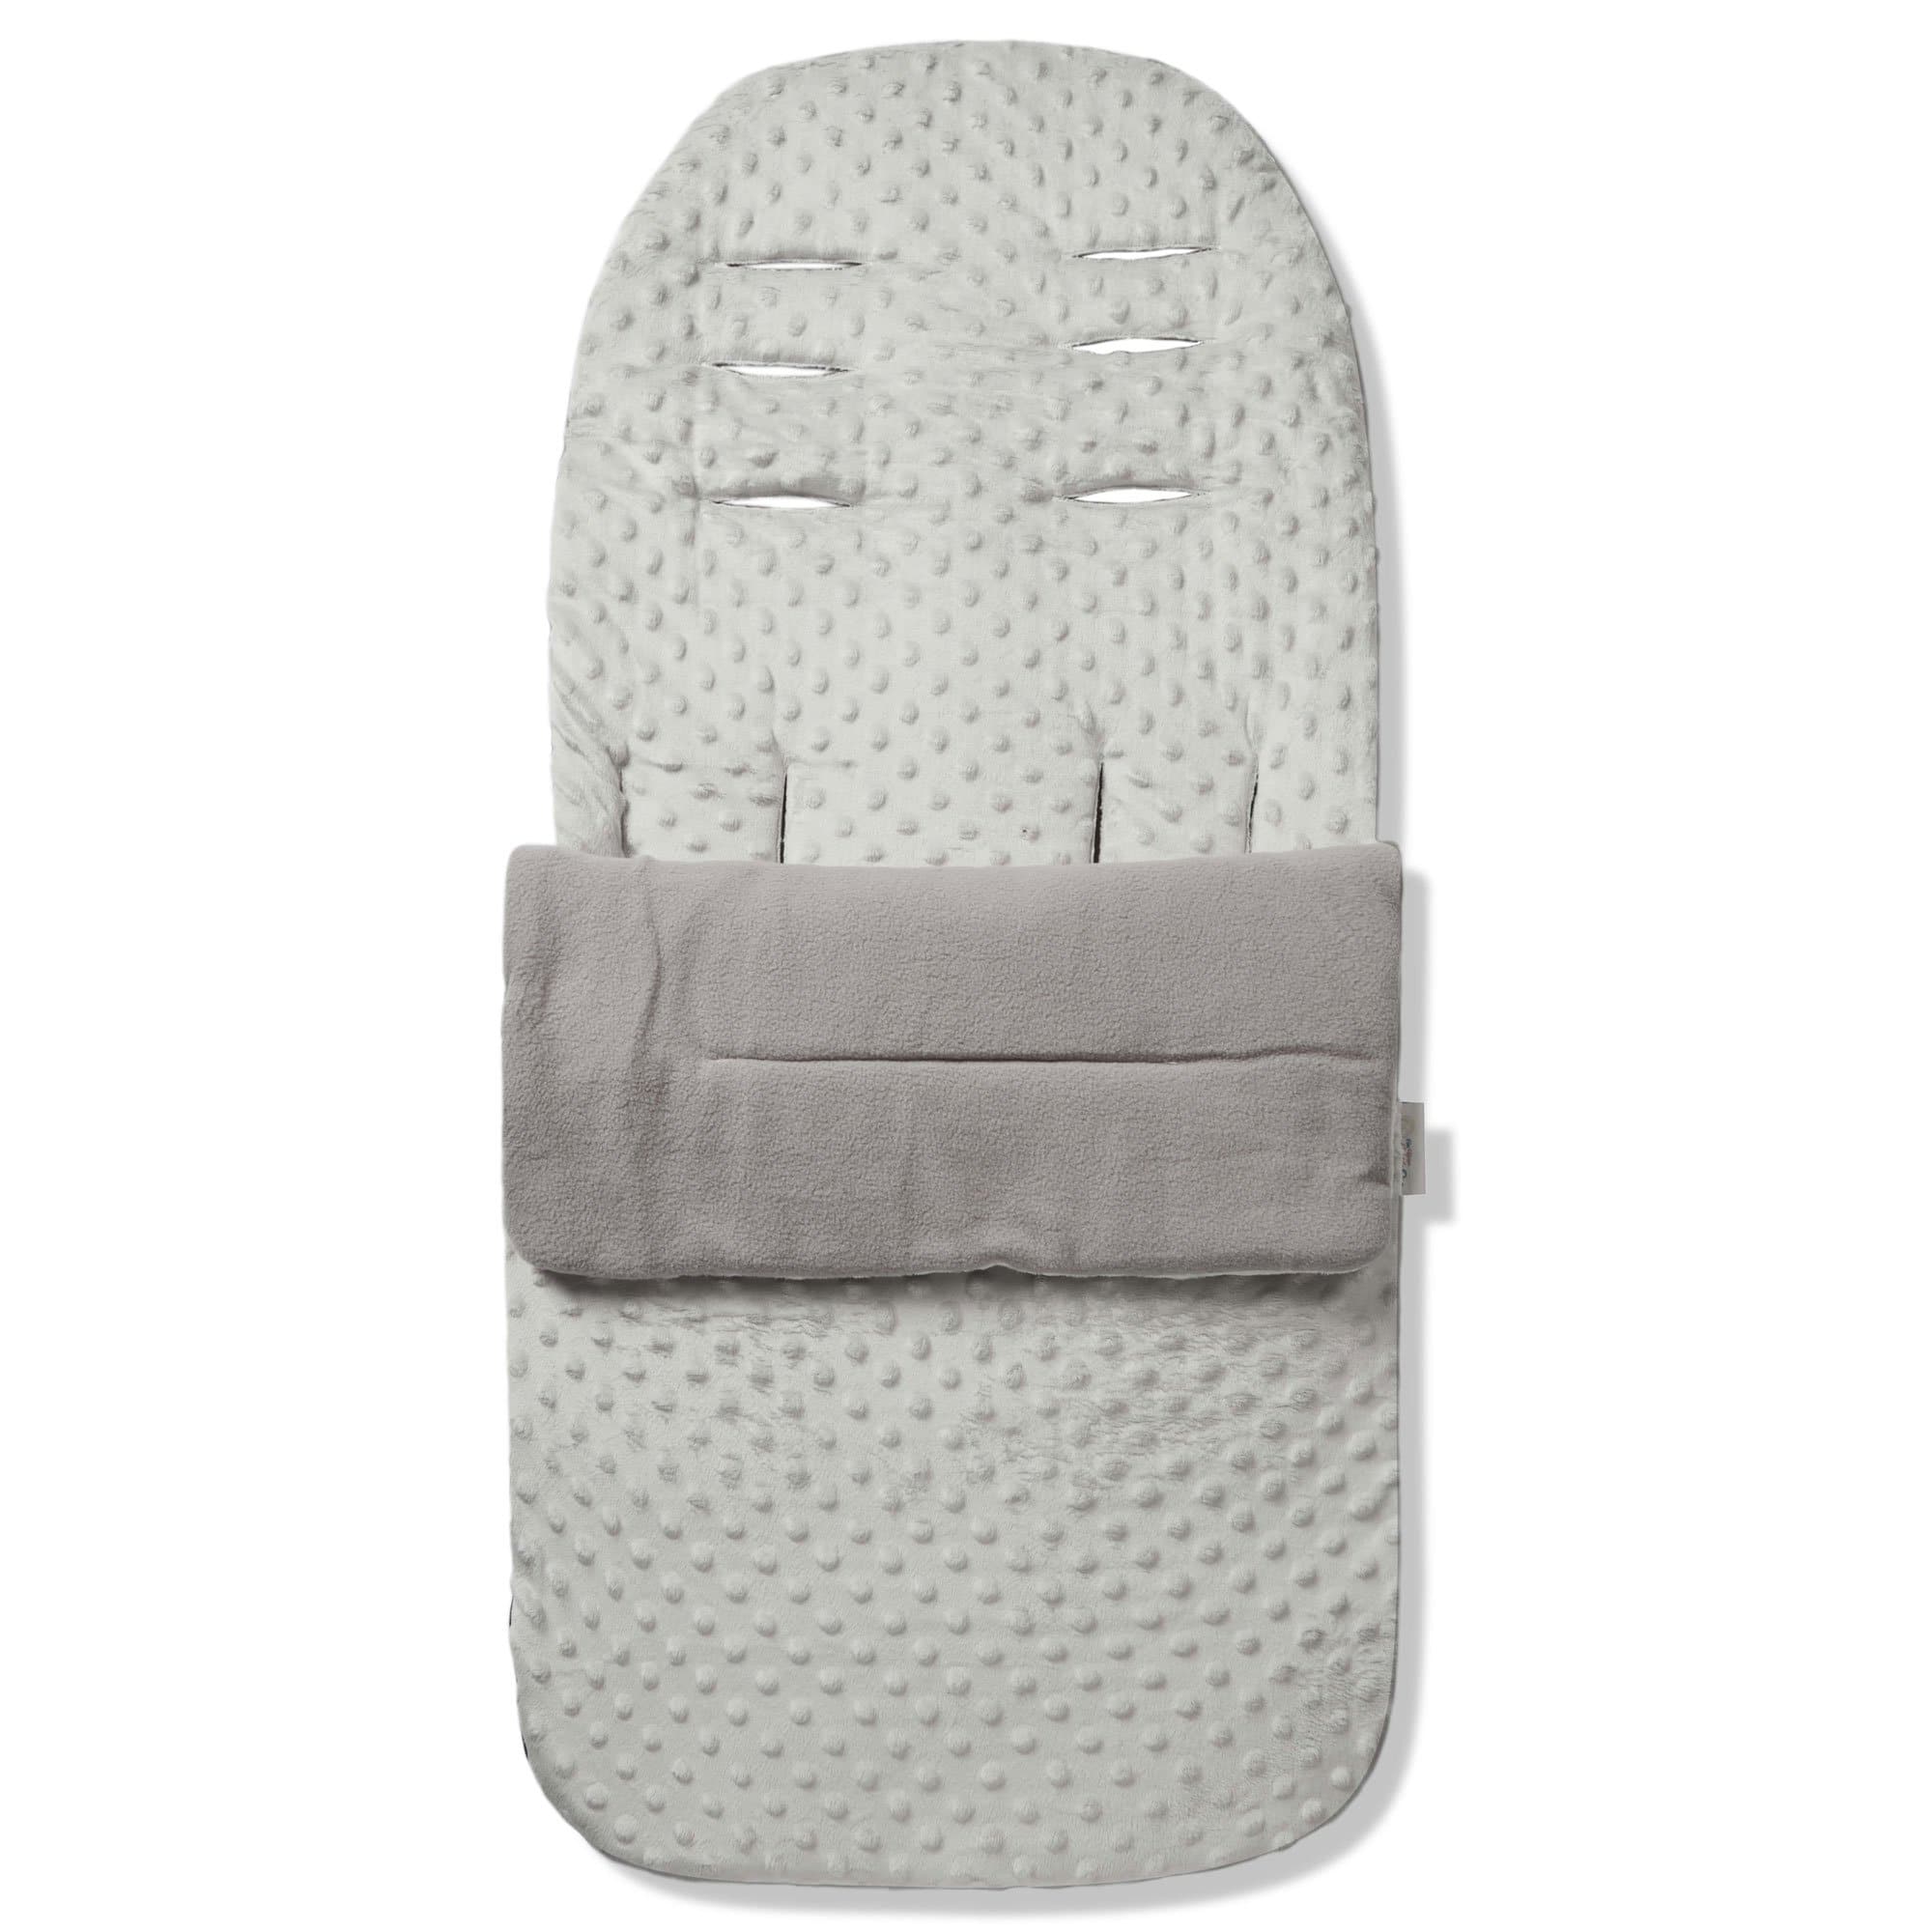 Dimple Footmuff / Cosy Toes Compatible with Red Castle - Grey / Fits All Models | For Your Little One